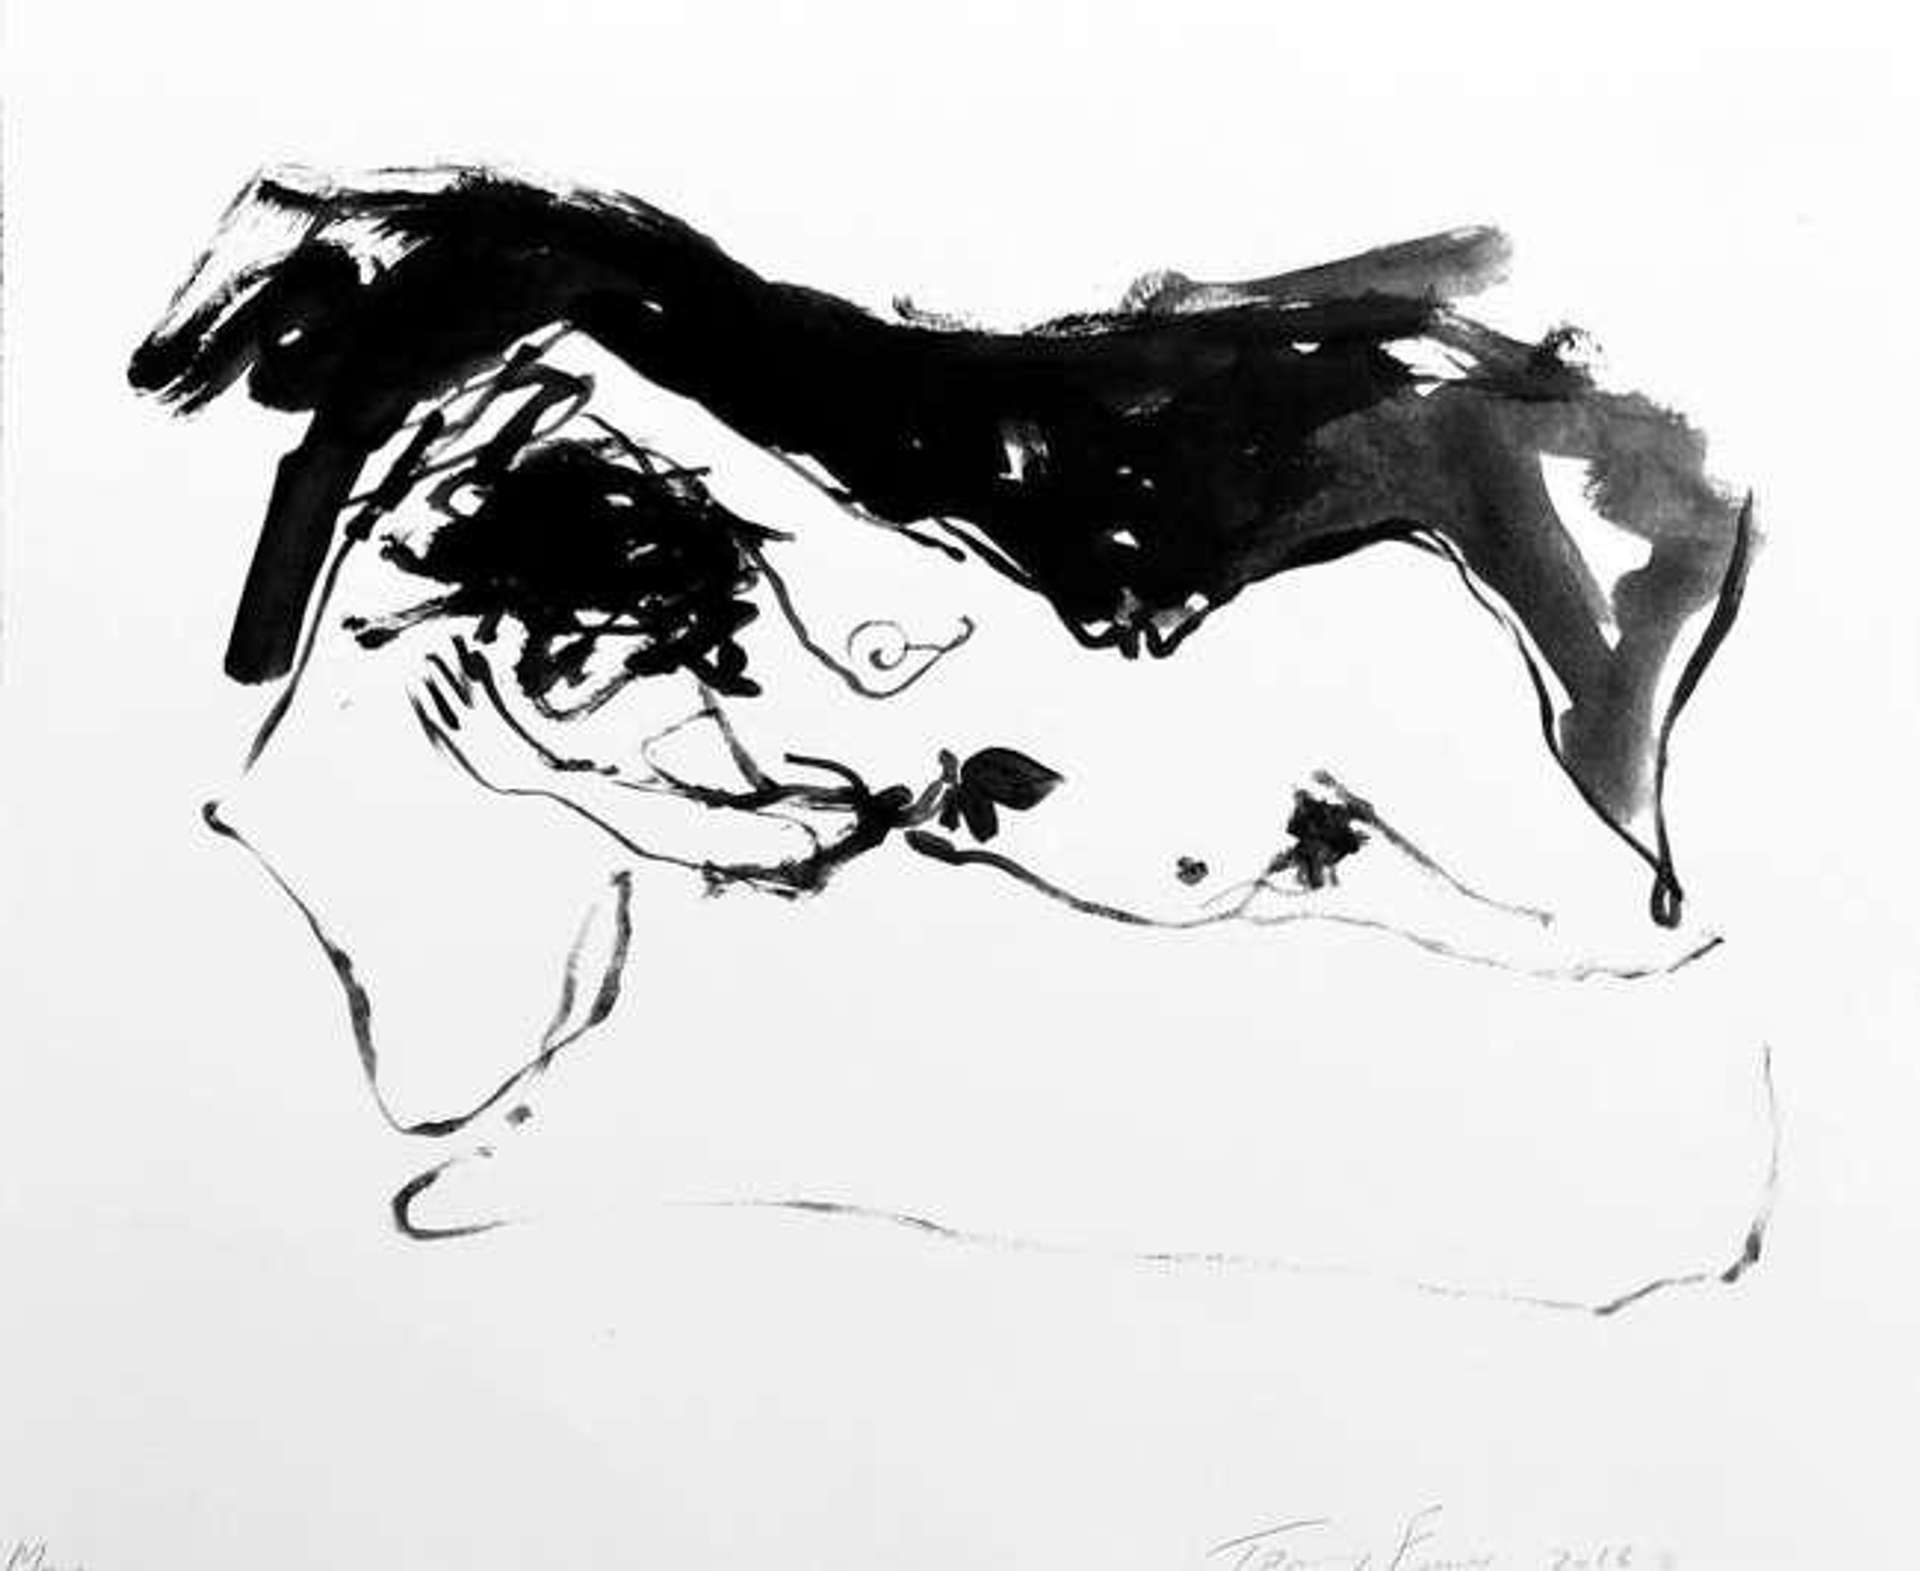 Move - Signed Print by Tracey Emin 2016 - MyArtBroker